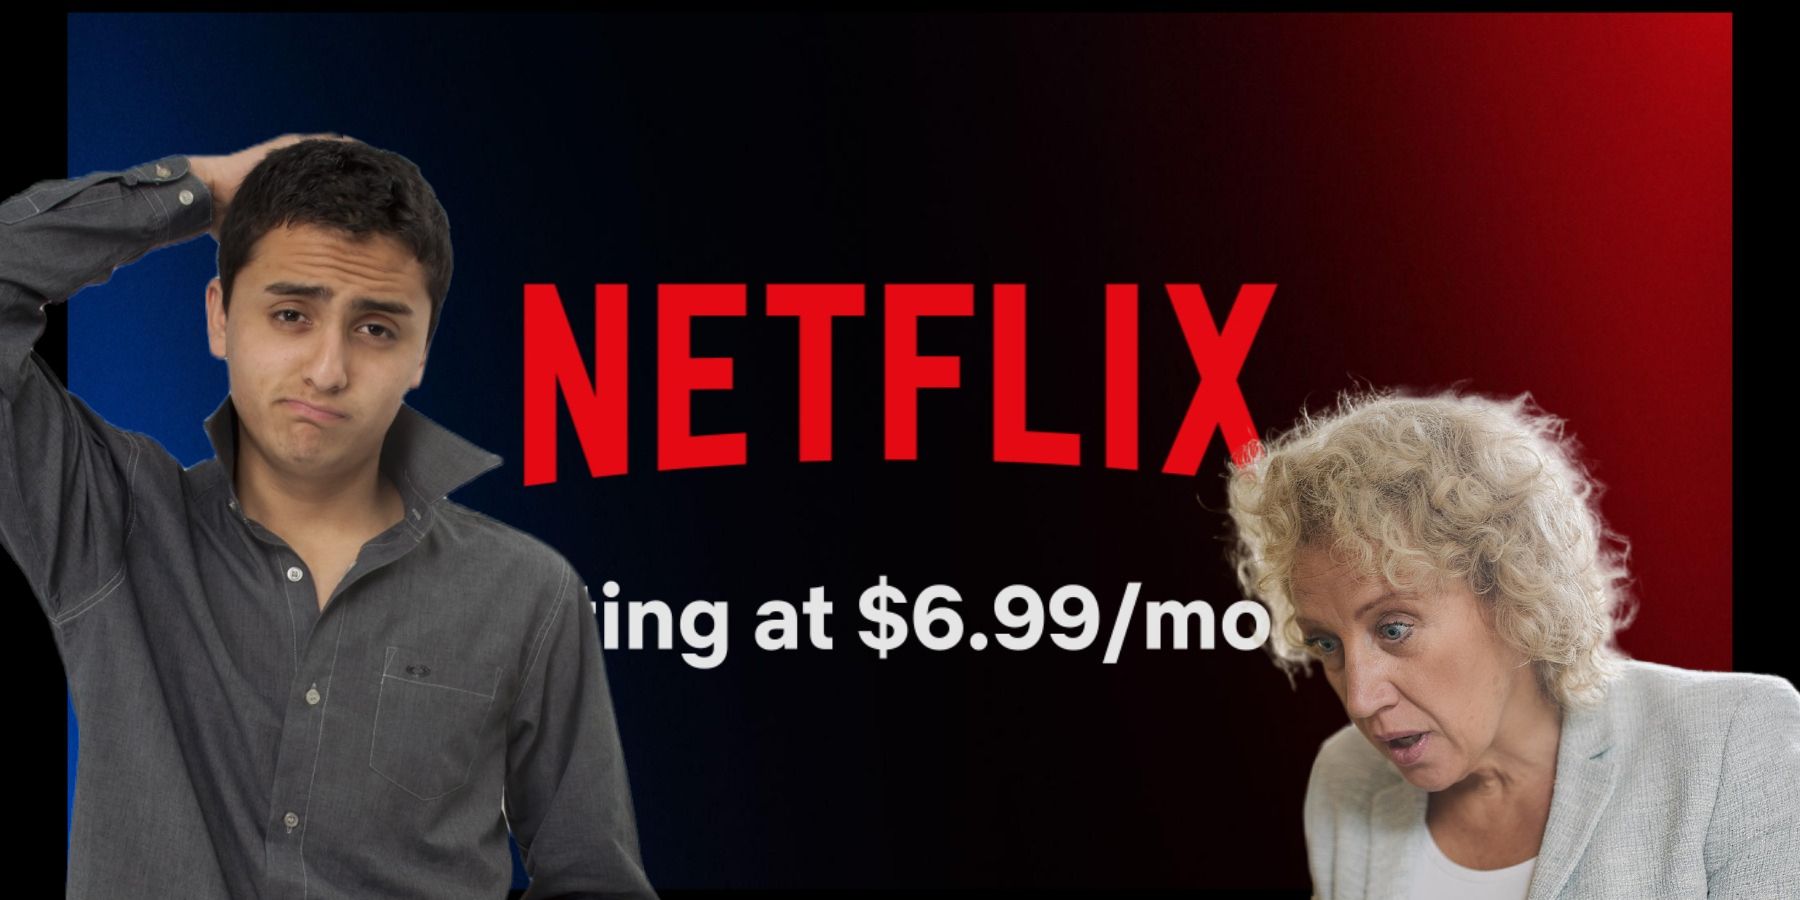 Netflix with ads banner with confused man and blonde woman cutouts